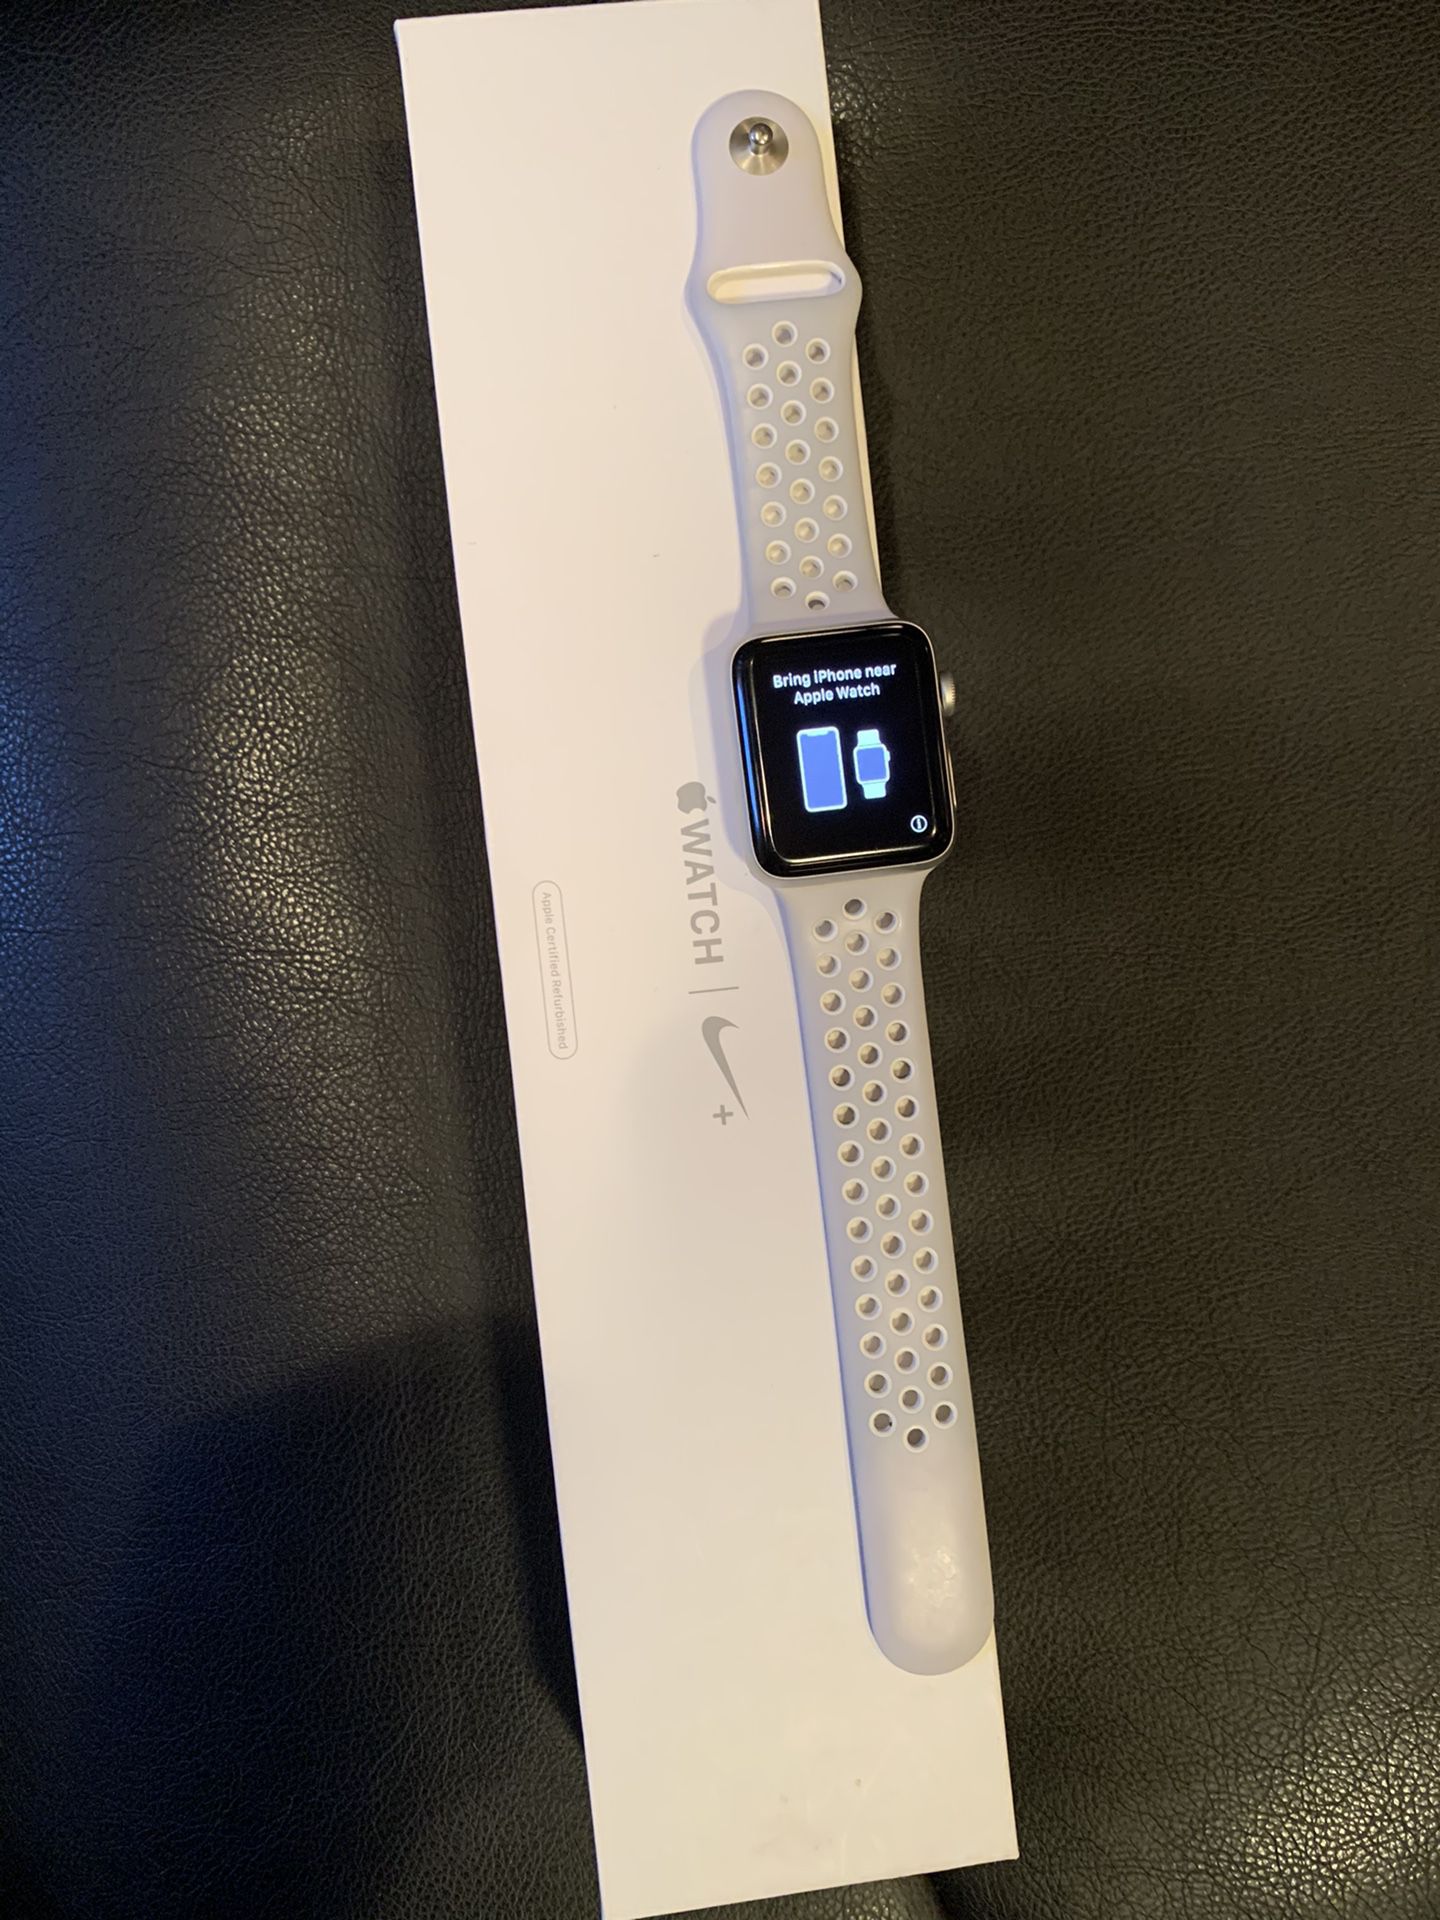 APPLES WATCH SERIES 2 (Mint Condition)